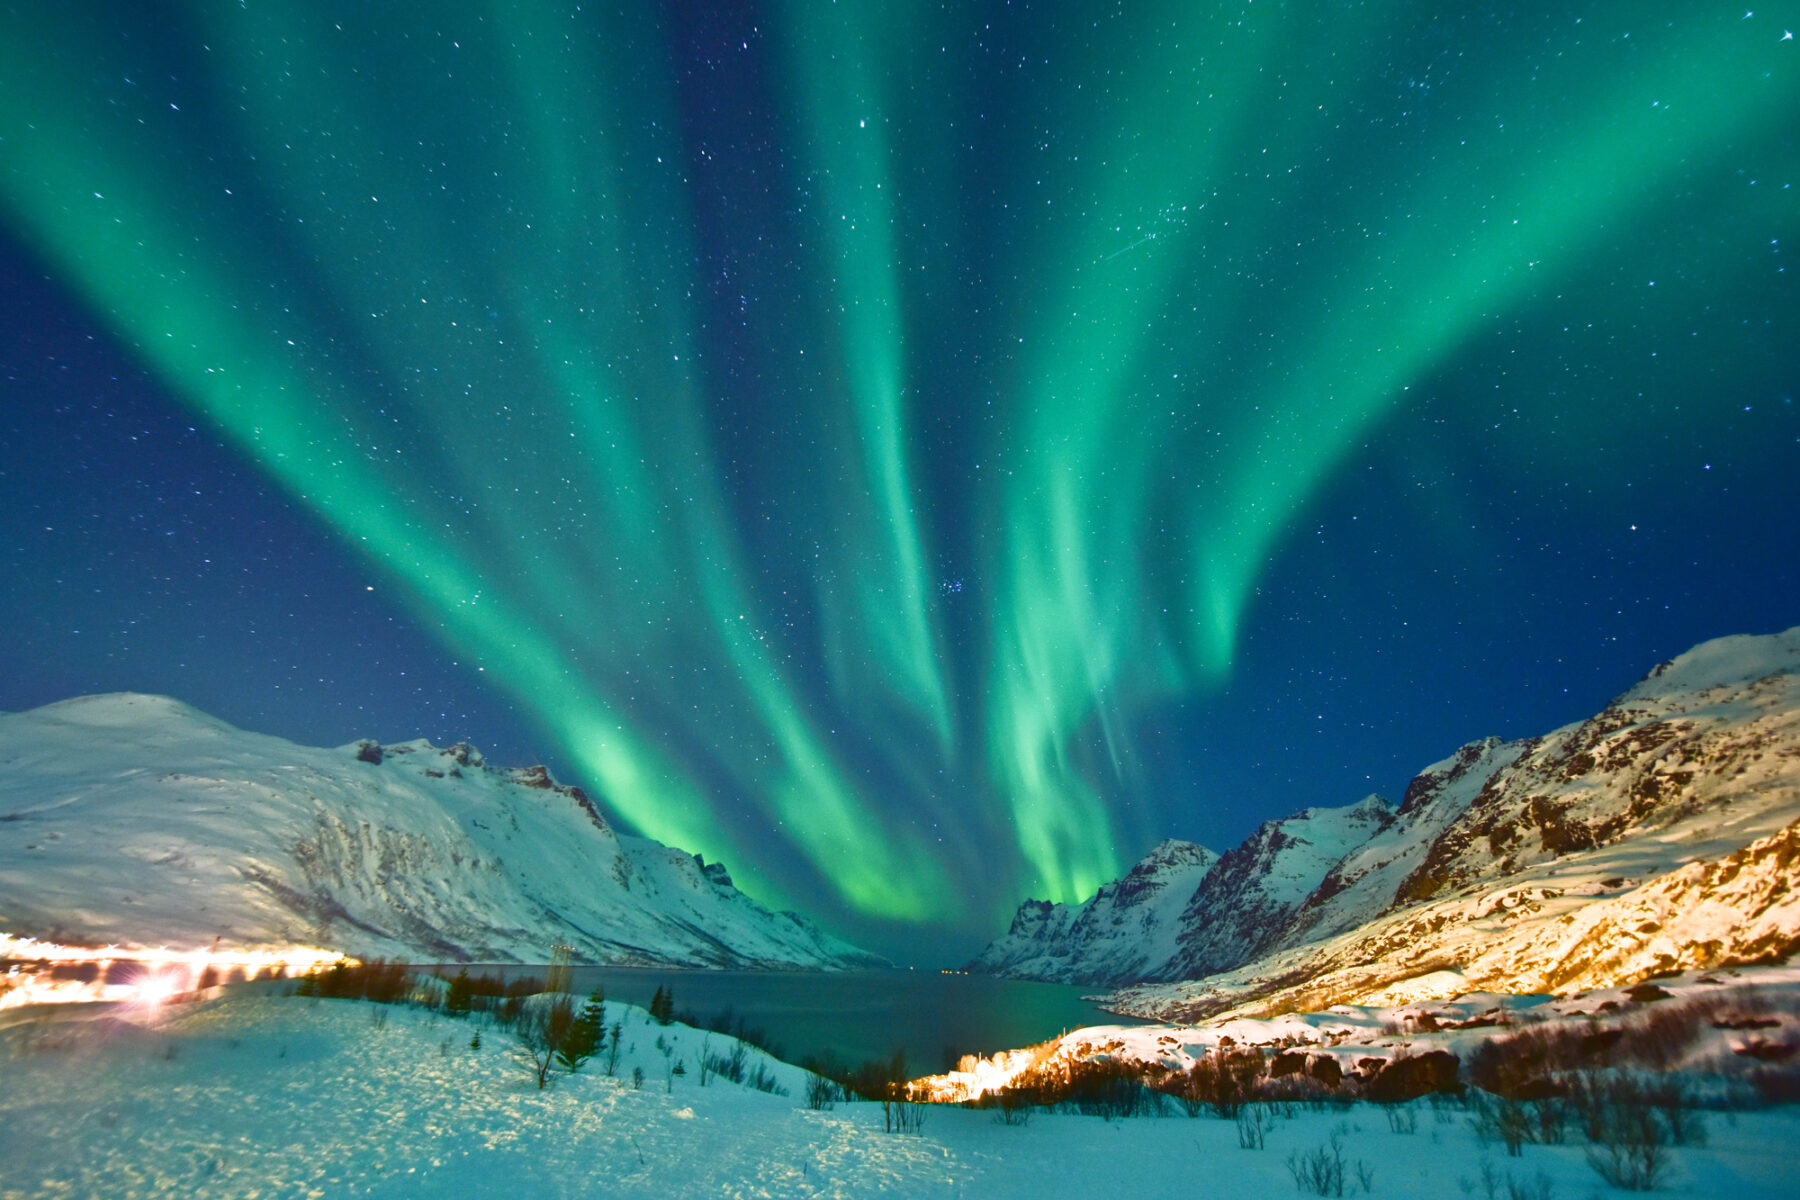  View the Northern Lights